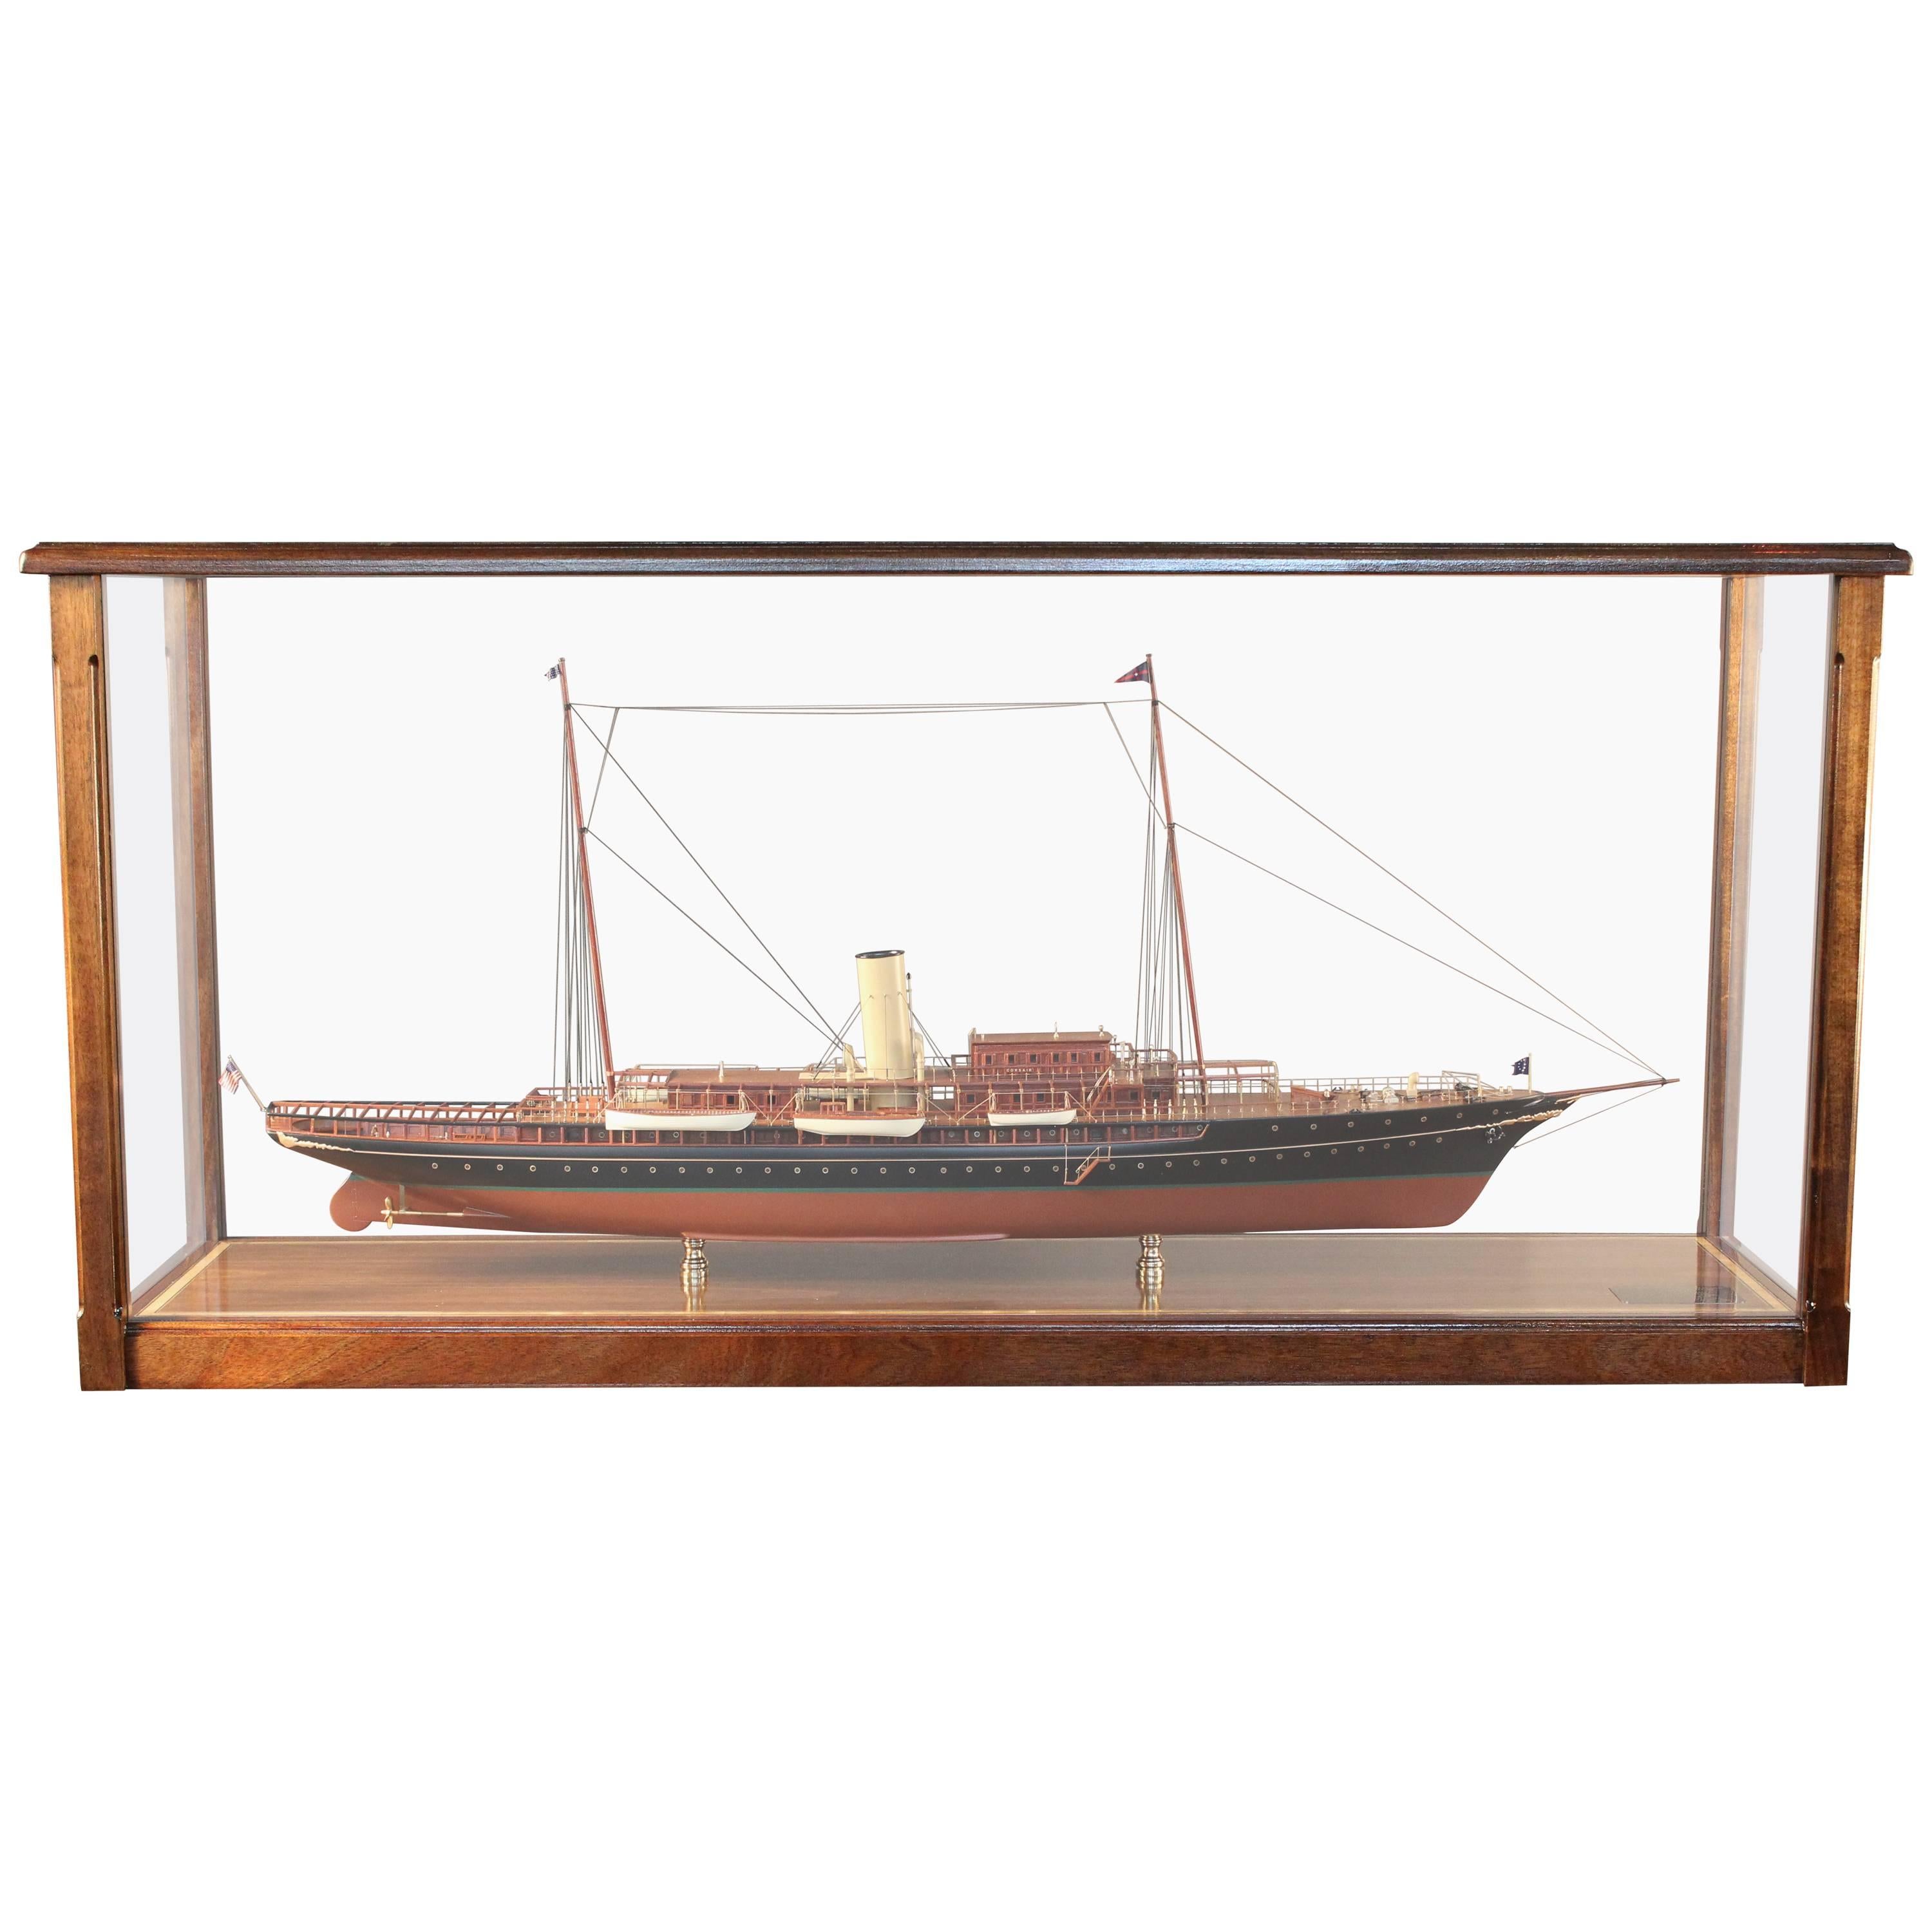 Steam Yacht "Corsair" of 1930, Ship Model in Wood Display Case with Table